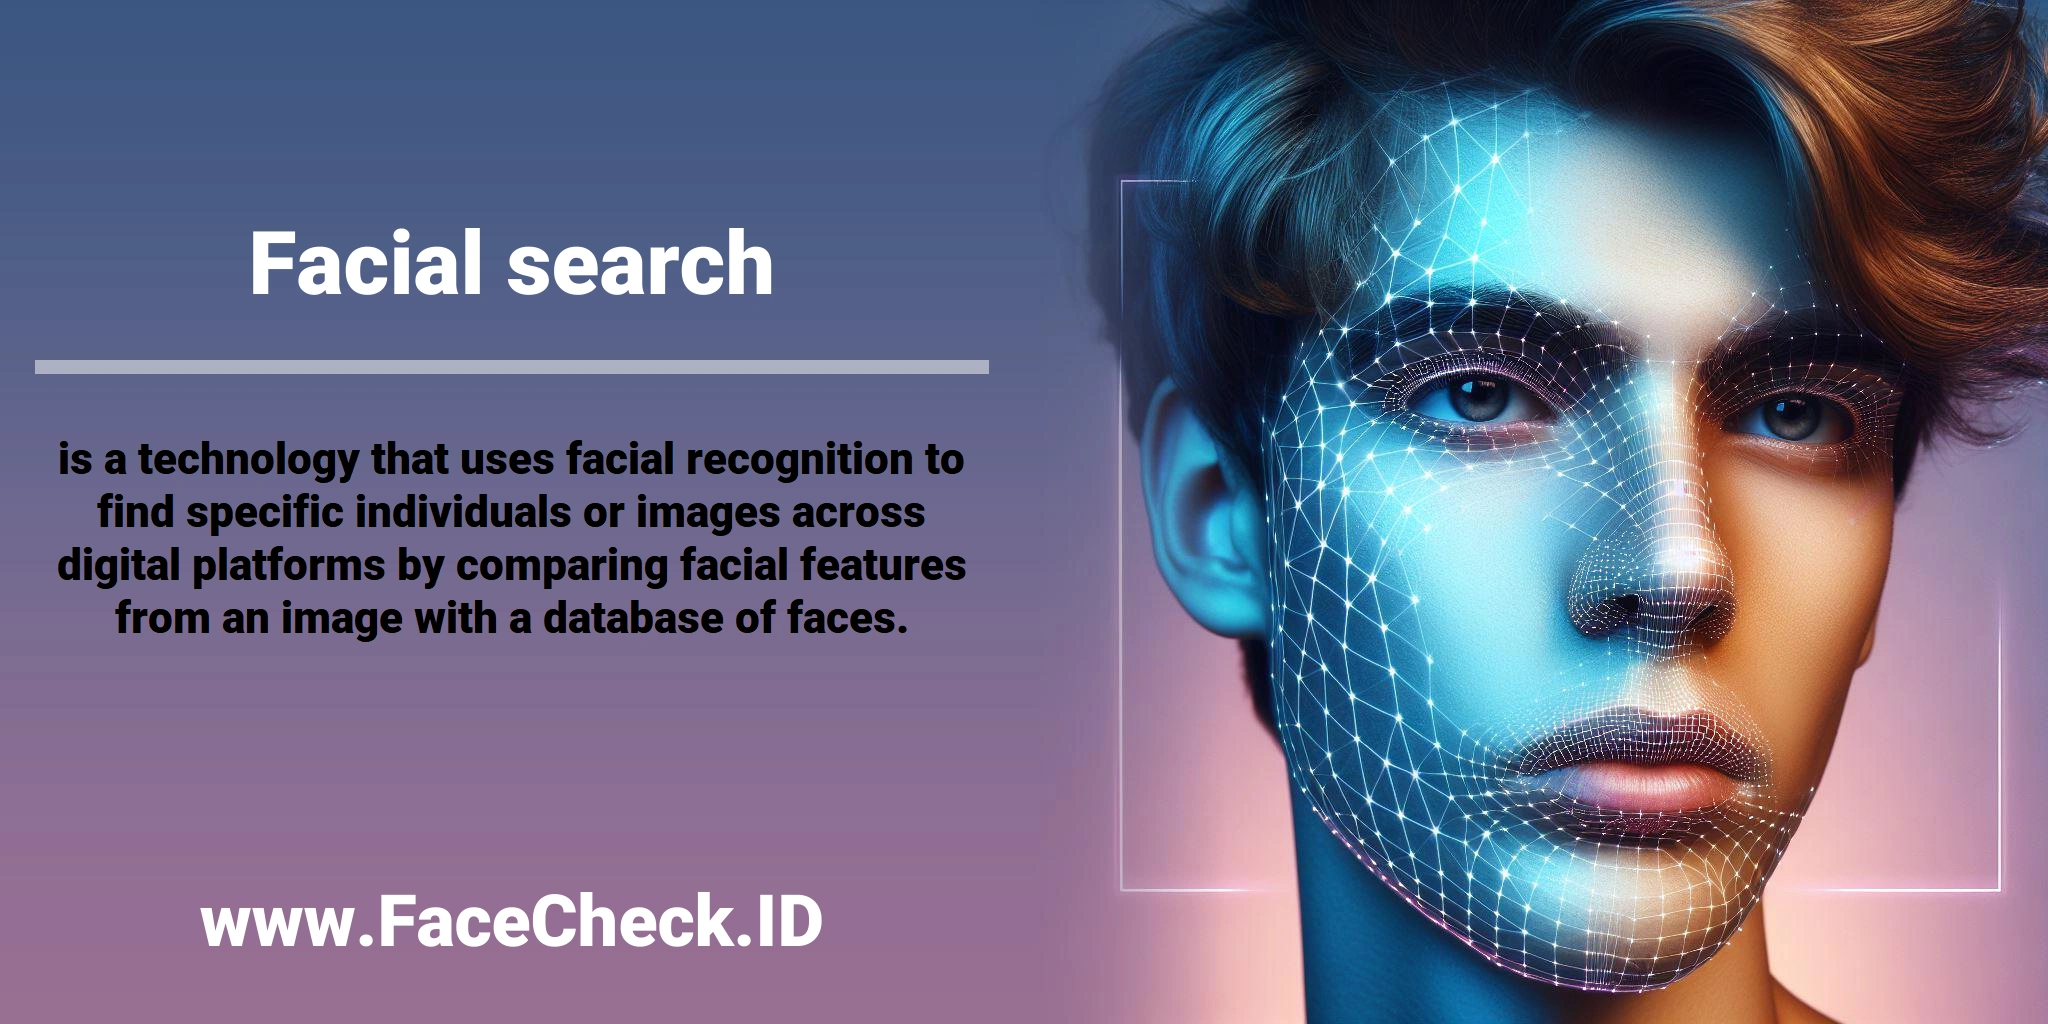 <b>Facial search</b> is a technology that uses facial recognition to find specific individuals or images across digital platforms by comparing facial features from an image with a database of faces.